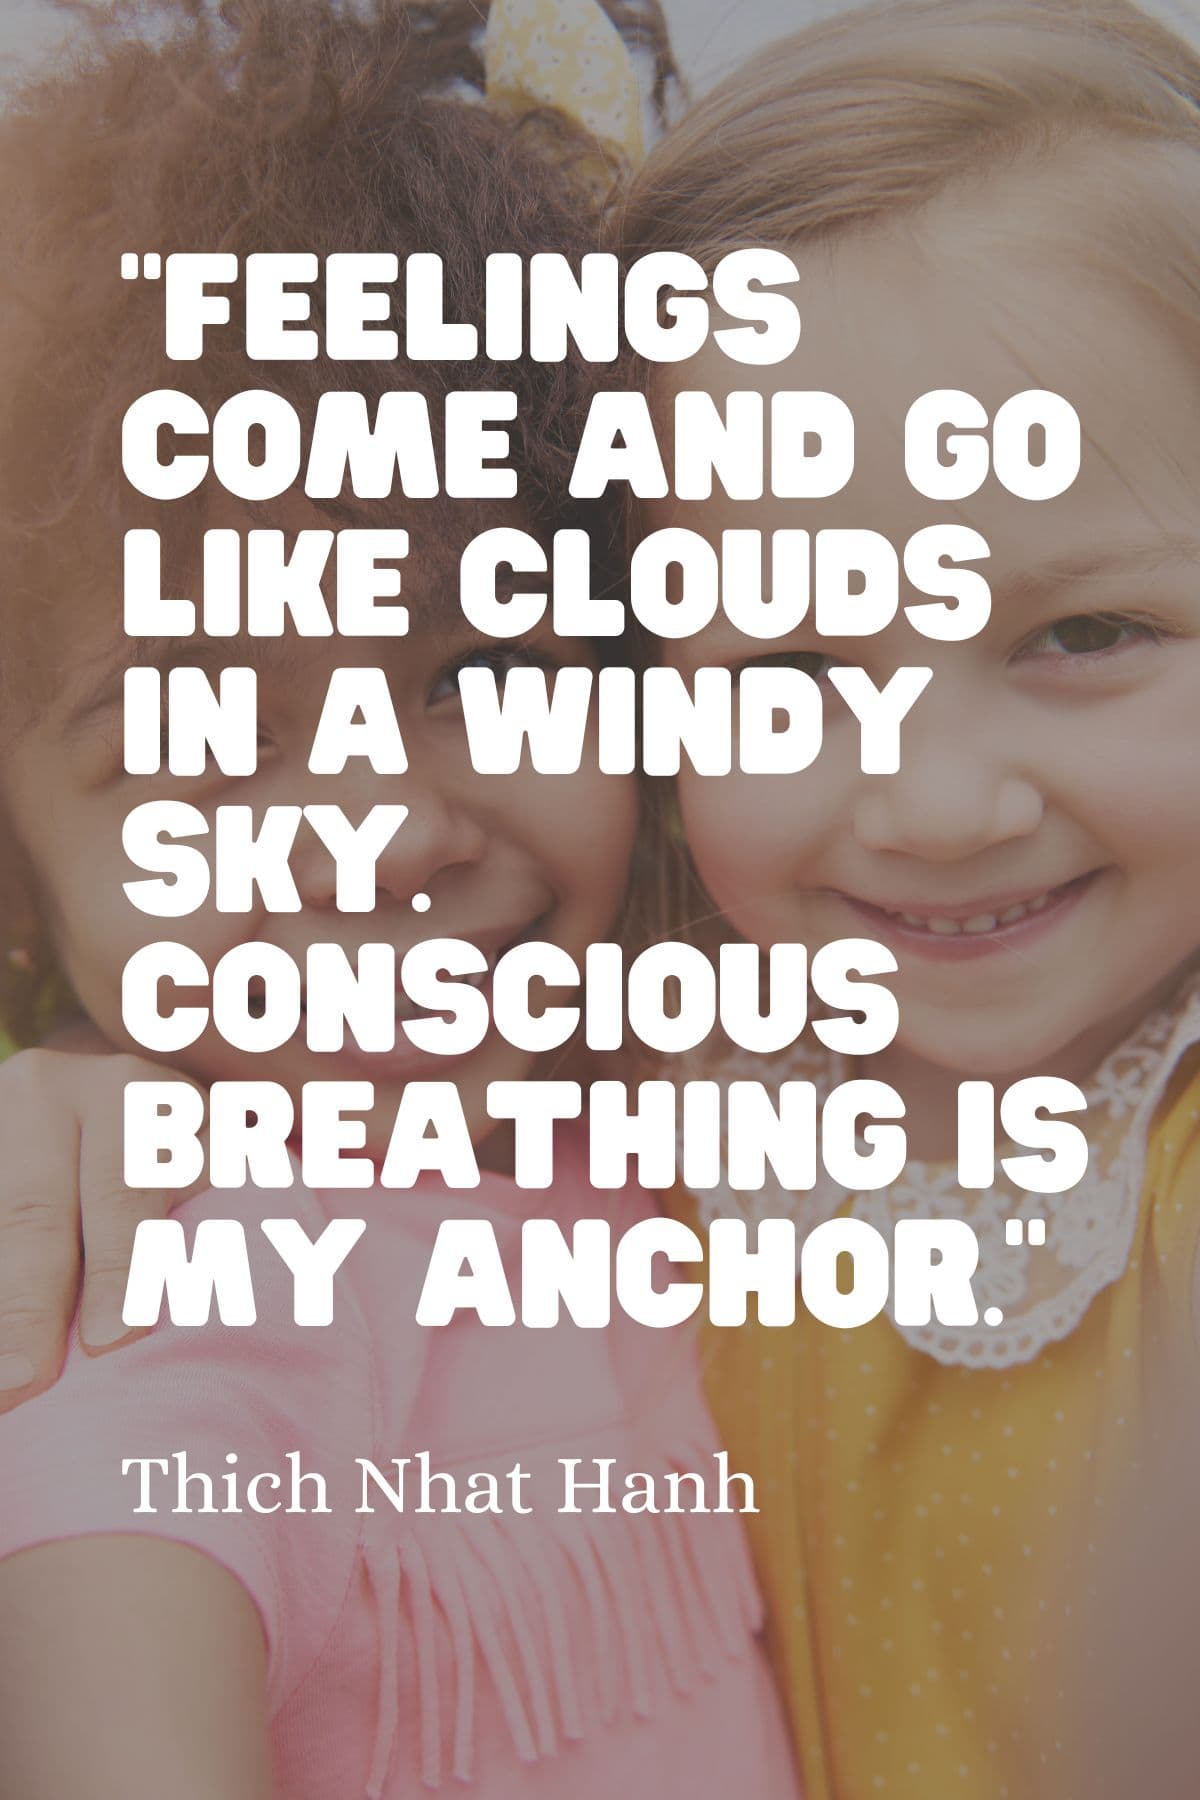 ”Feelings come and go like clouds in a windy sky. Conscious breathing is my anchor.” - Thich Nhat Hanh